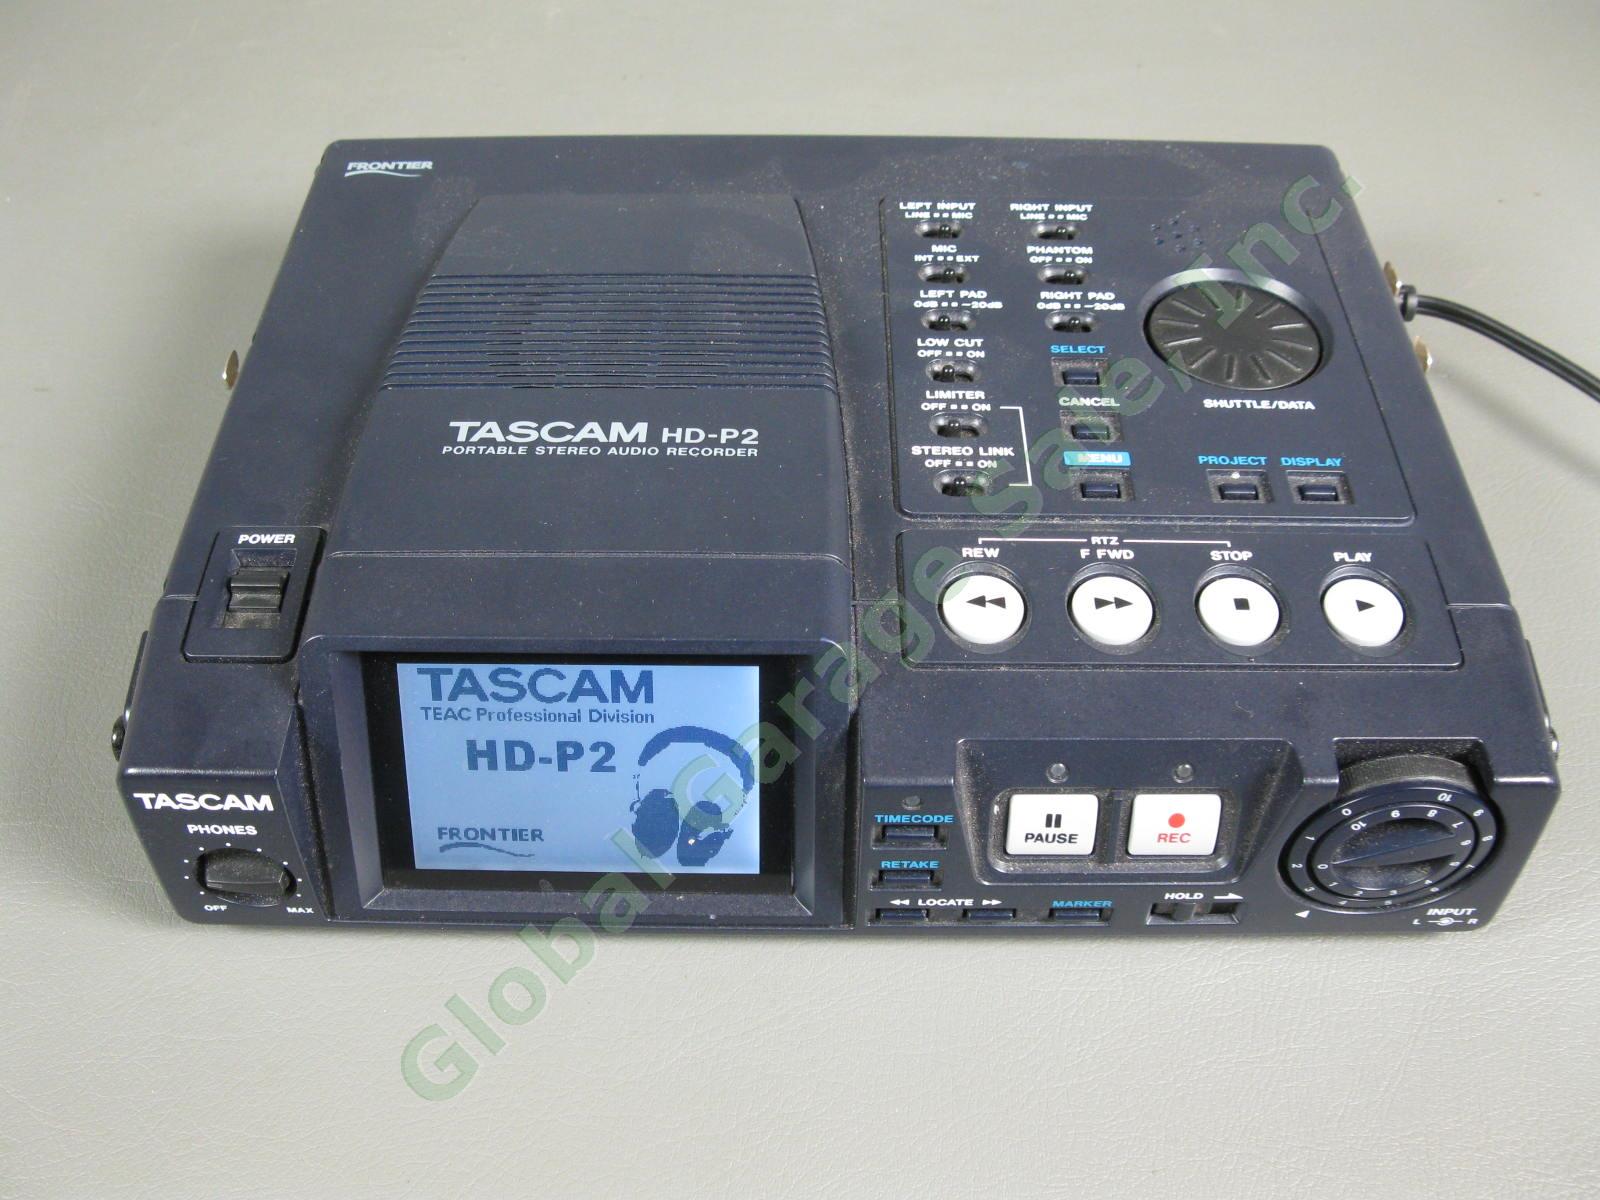 TASCAM Frontier HD-P2 Portable Stereo High Definition Multi Track Audio Recorder